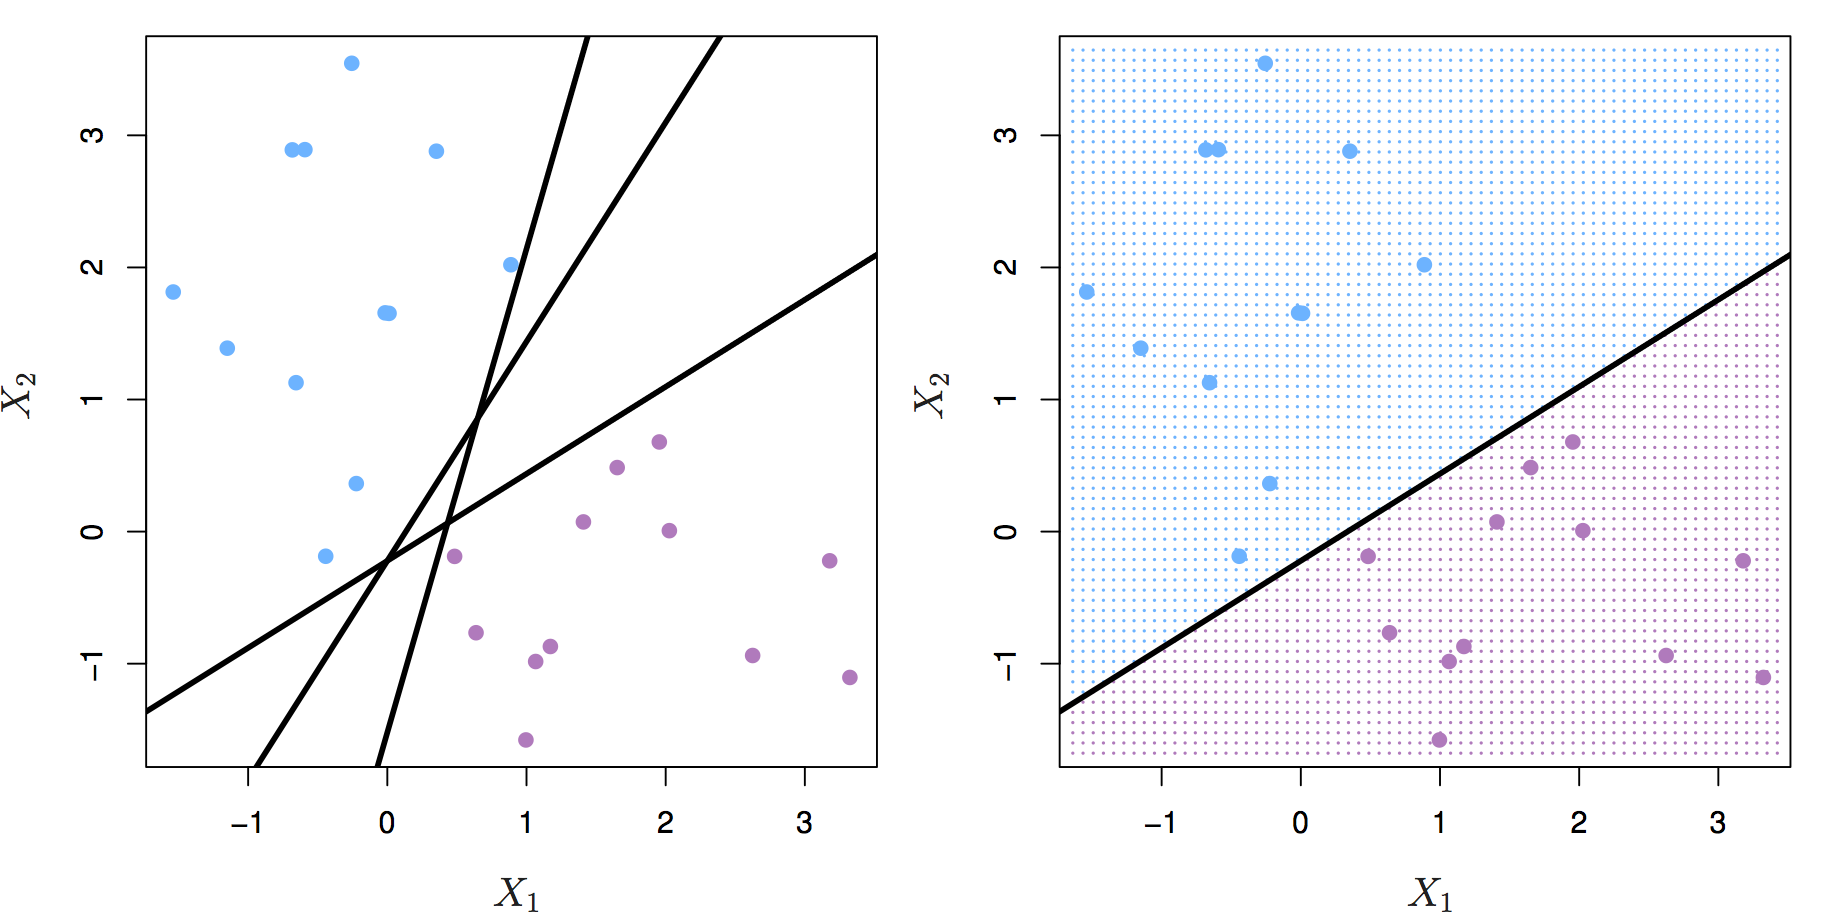 Left: two classes of observations (blue, purple) and three separating hyperplanes. Right: separating hyperplane shown as black line and grid indicates decision rule. Source: http://www-bcf.usc.edu/~gareth/ISL/